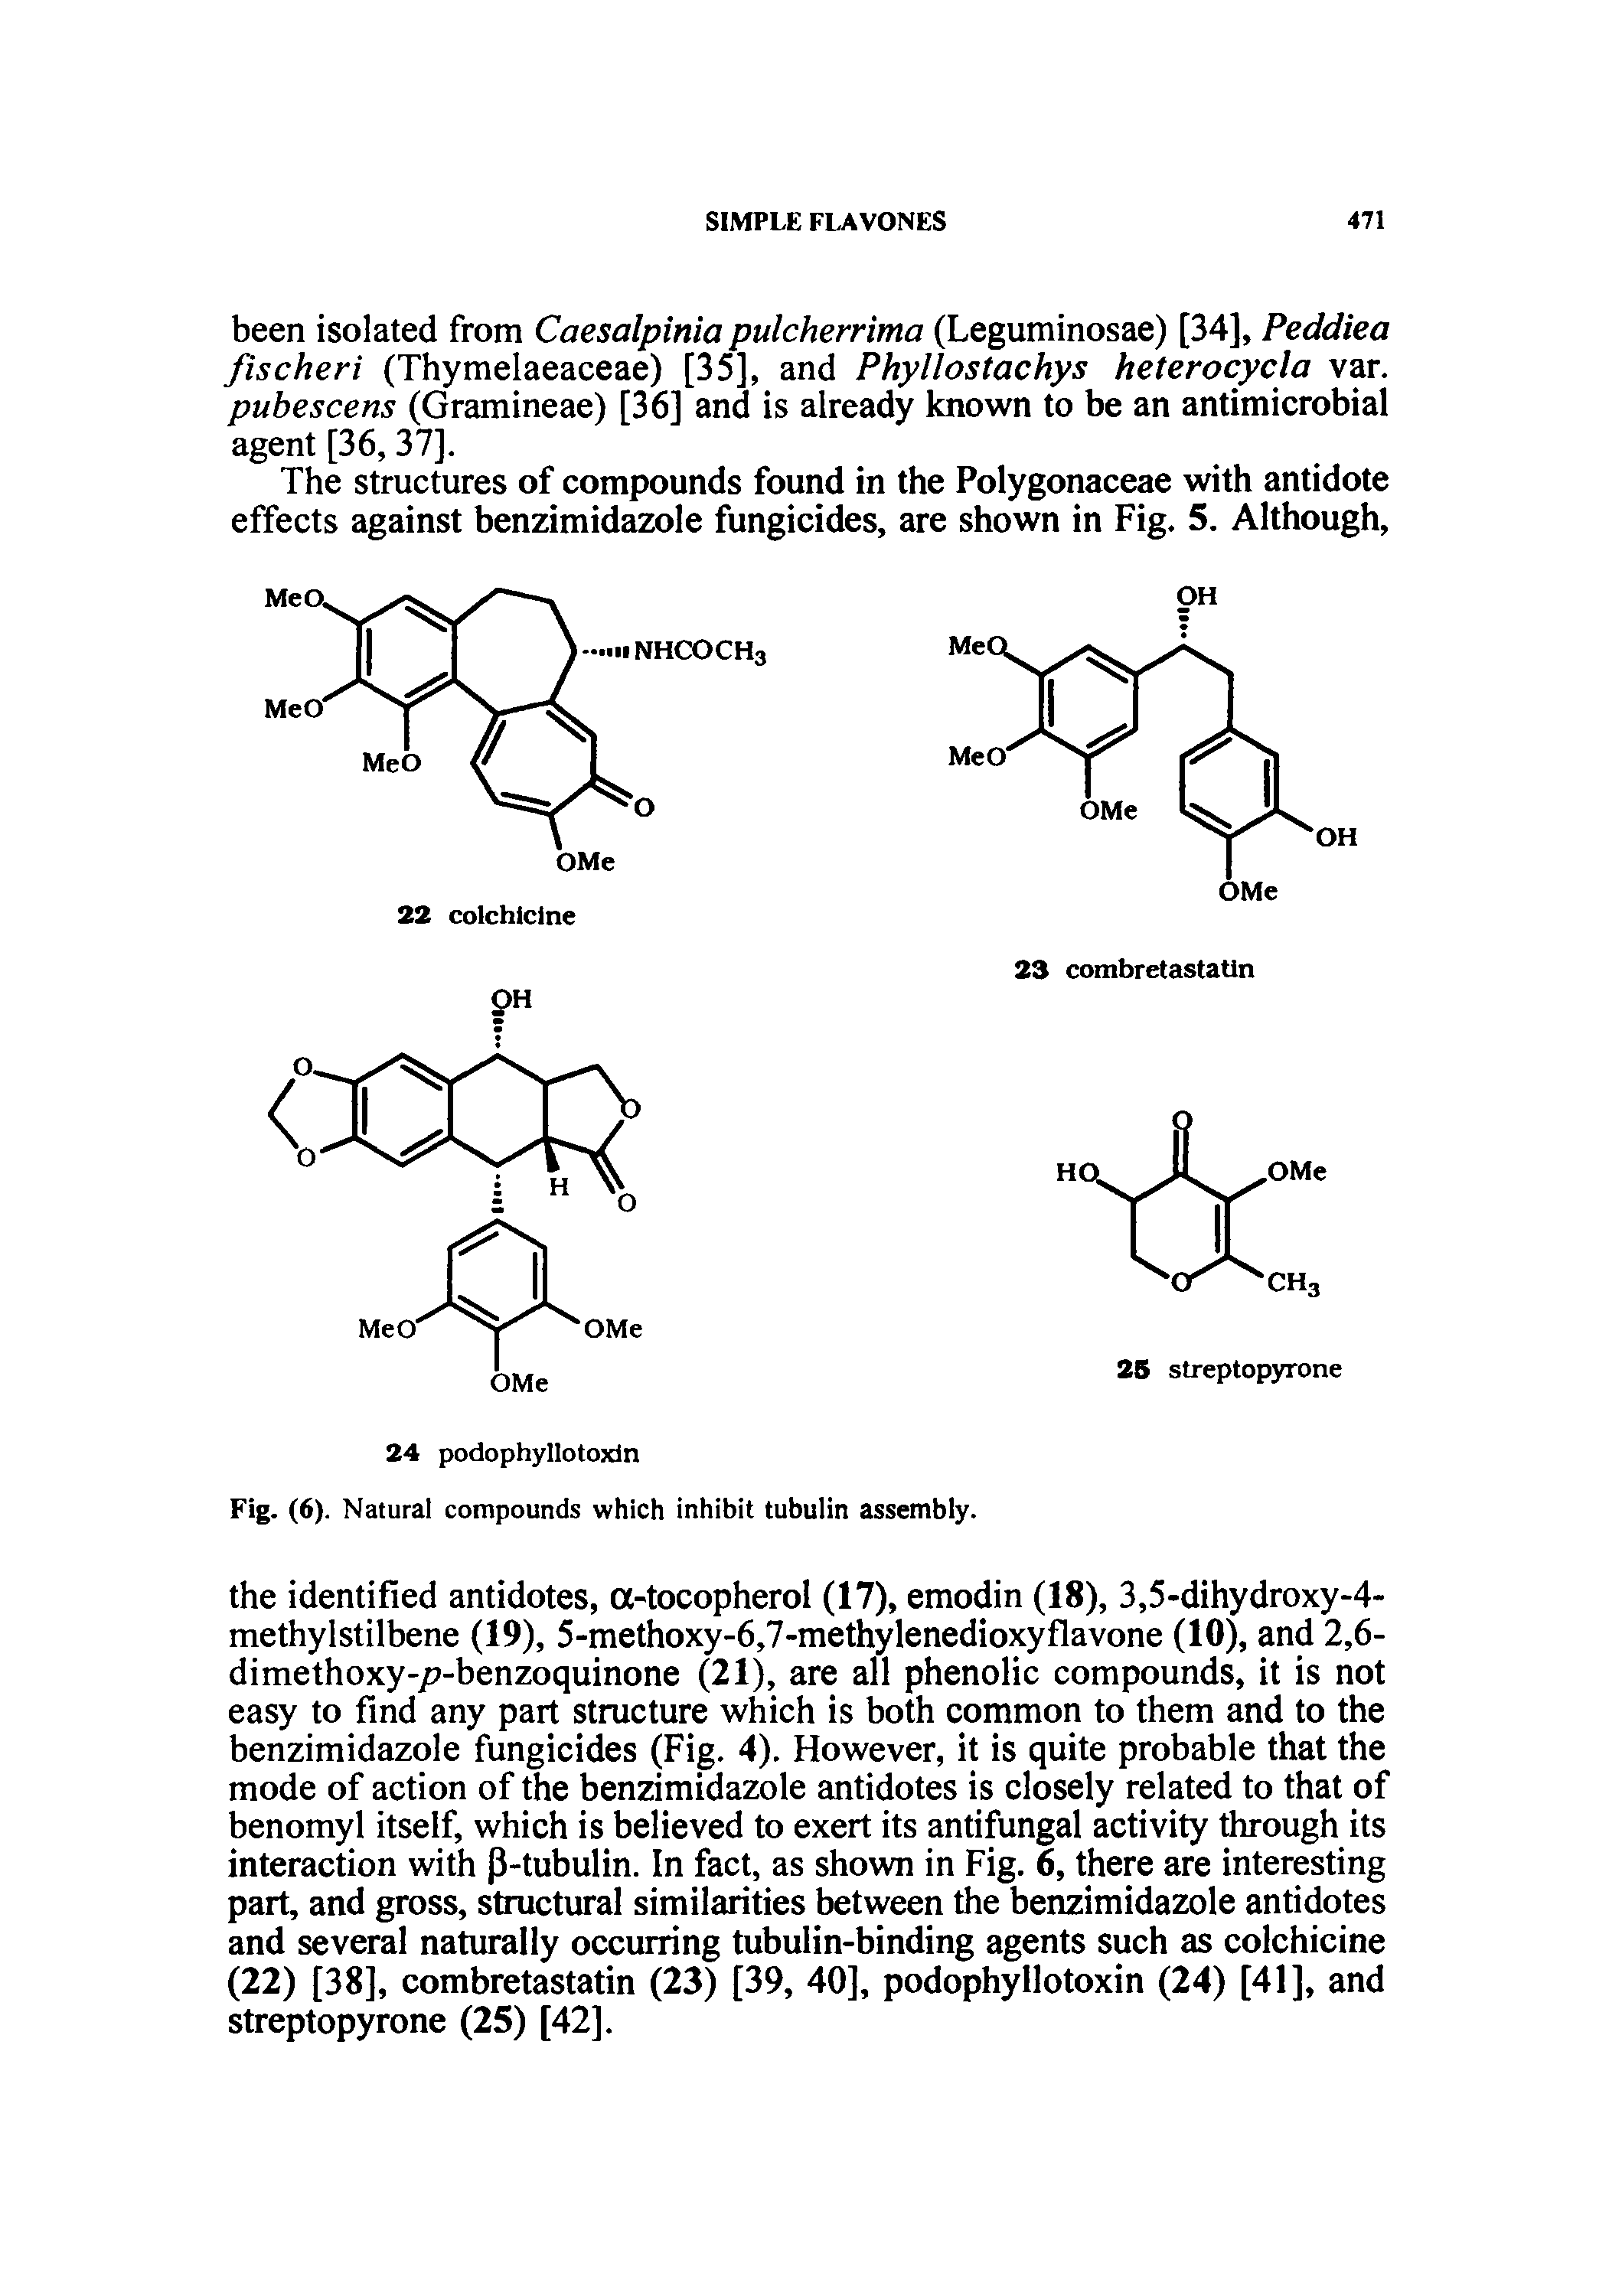 Fig. (6). Natural compounds which inhibit tubulin assembly.